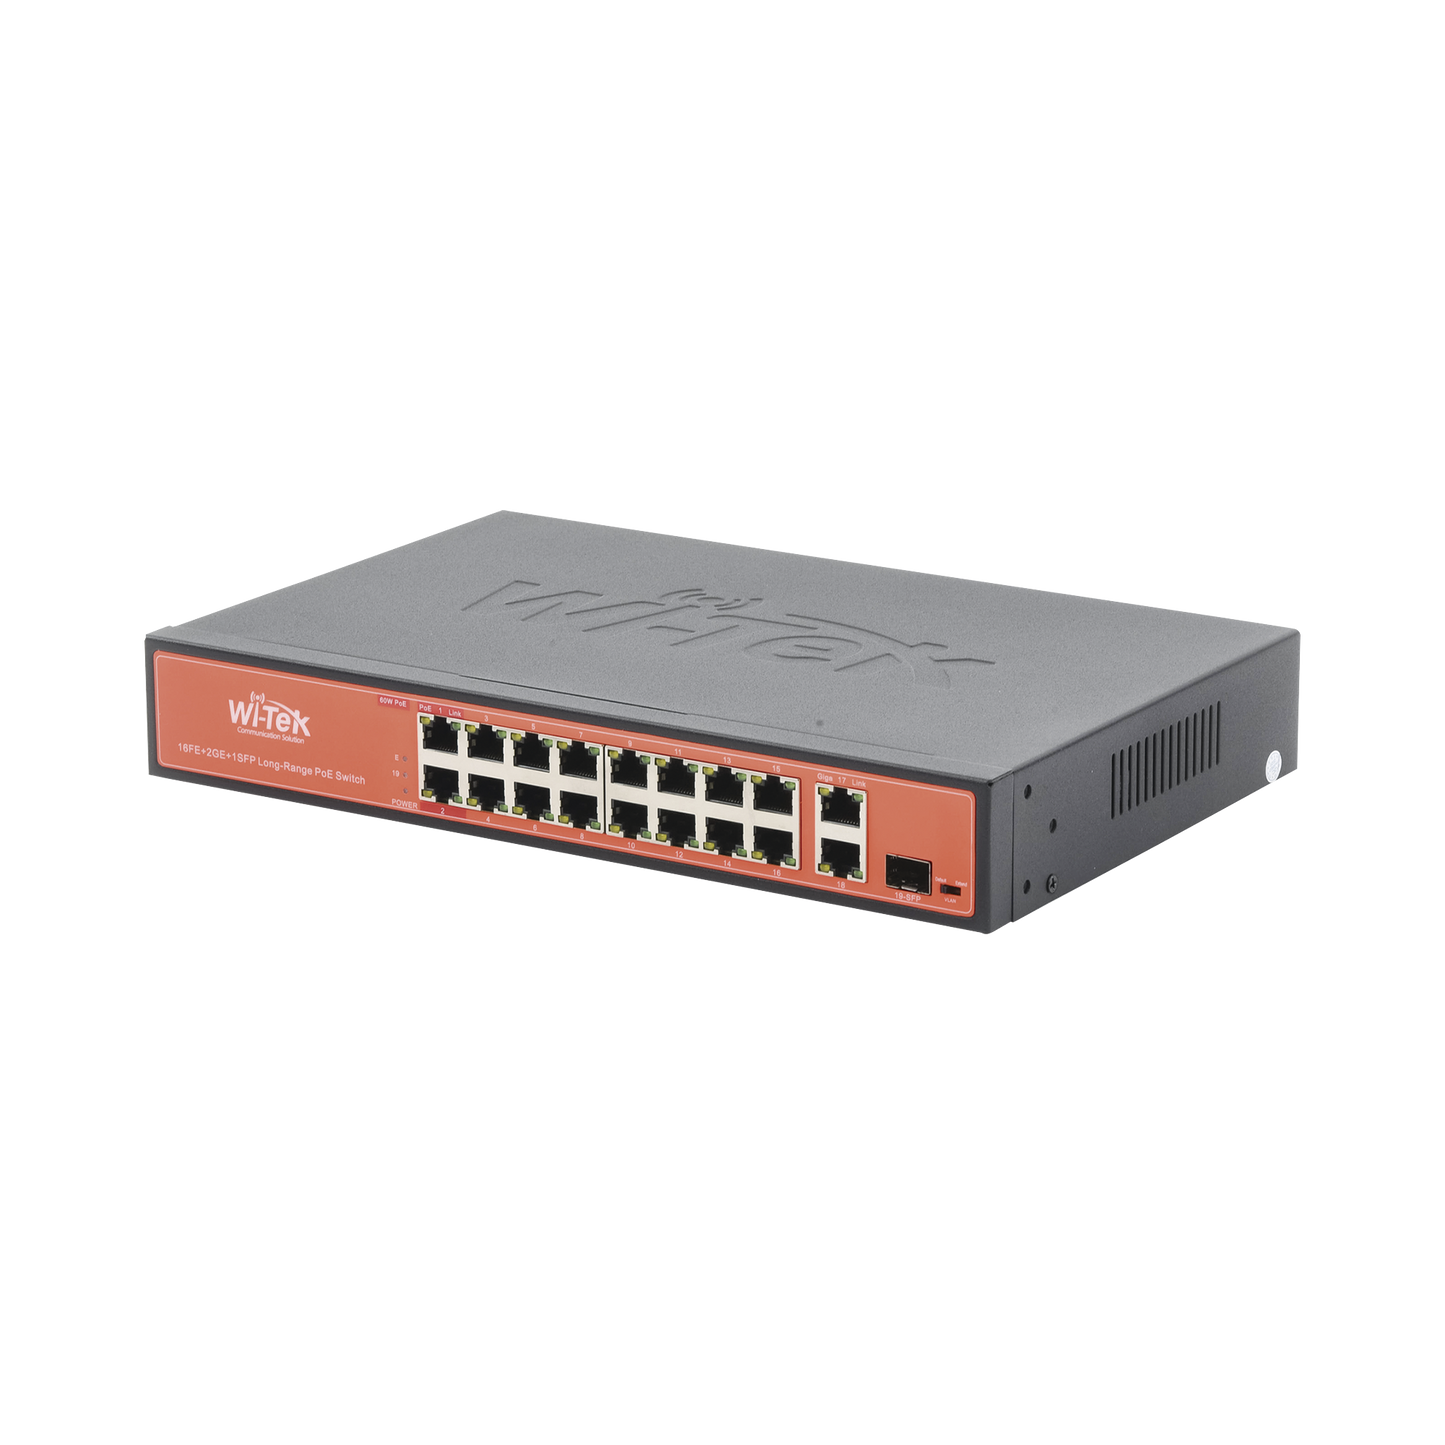 Long-Range PoE Switch With 16 FE Ports + 1 GE Port and 1 Combo SFP Port, PoE Power Budget Can Be Up to 200W